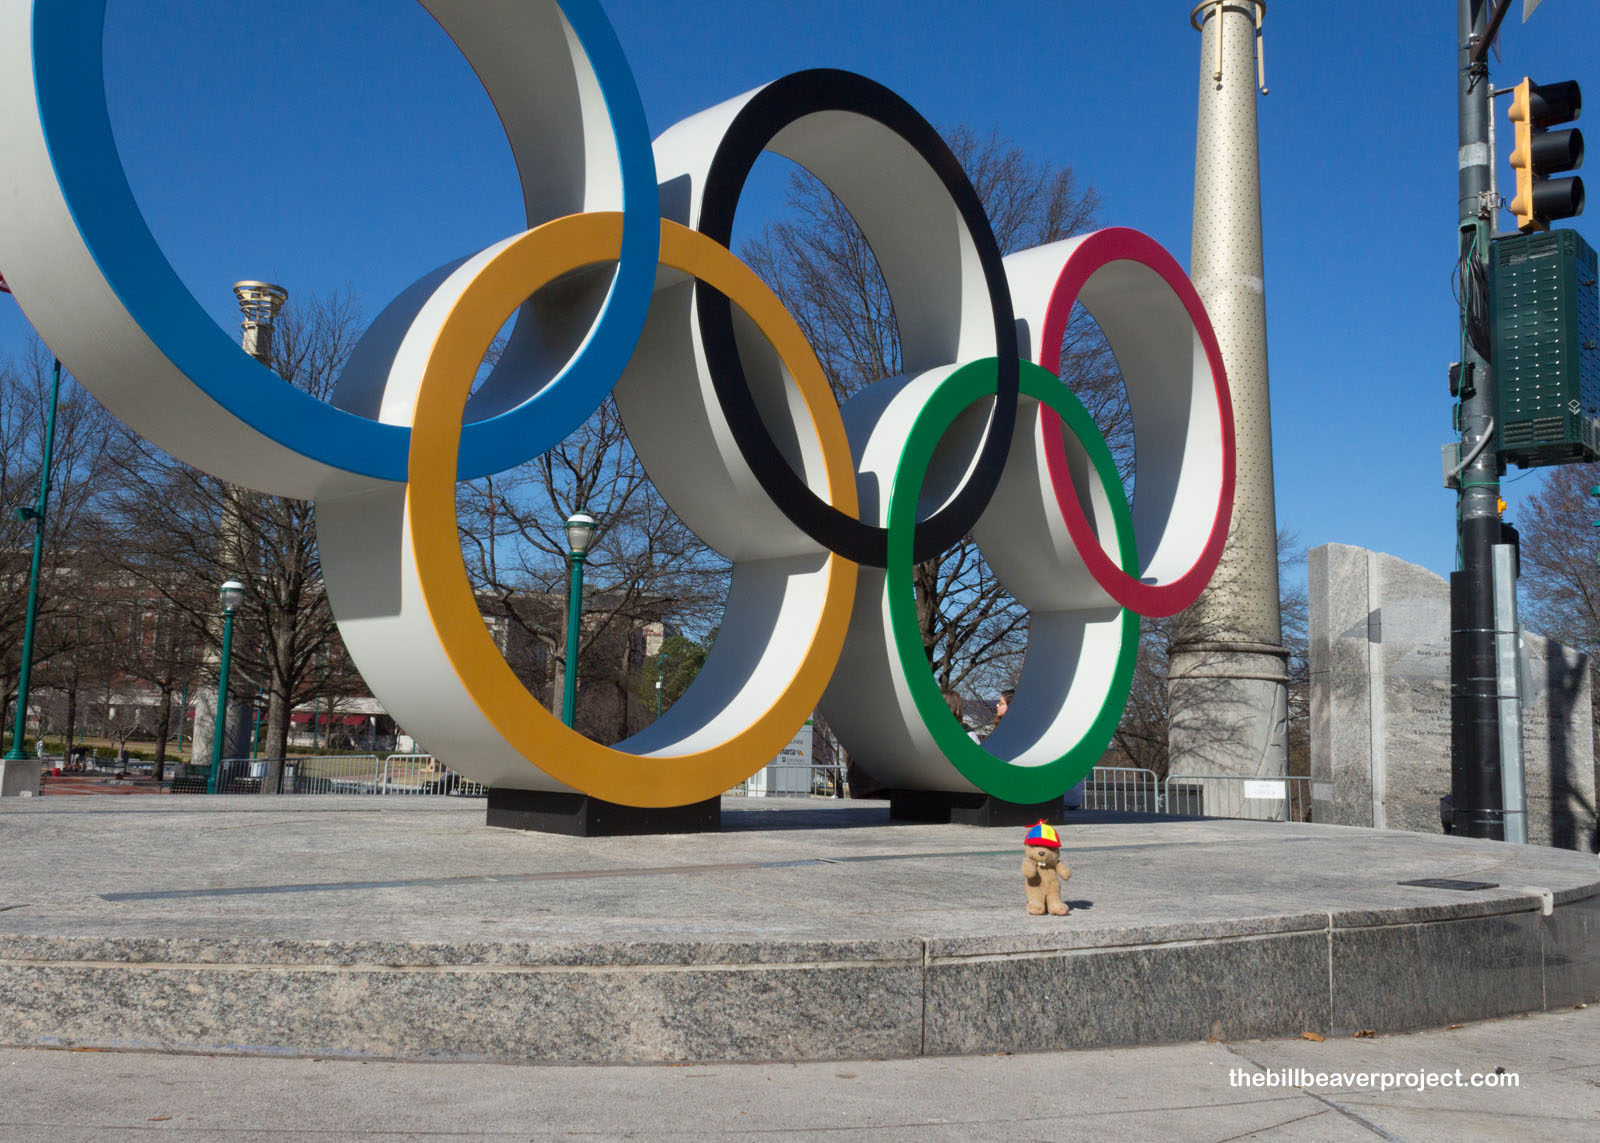 The Olympic rings!